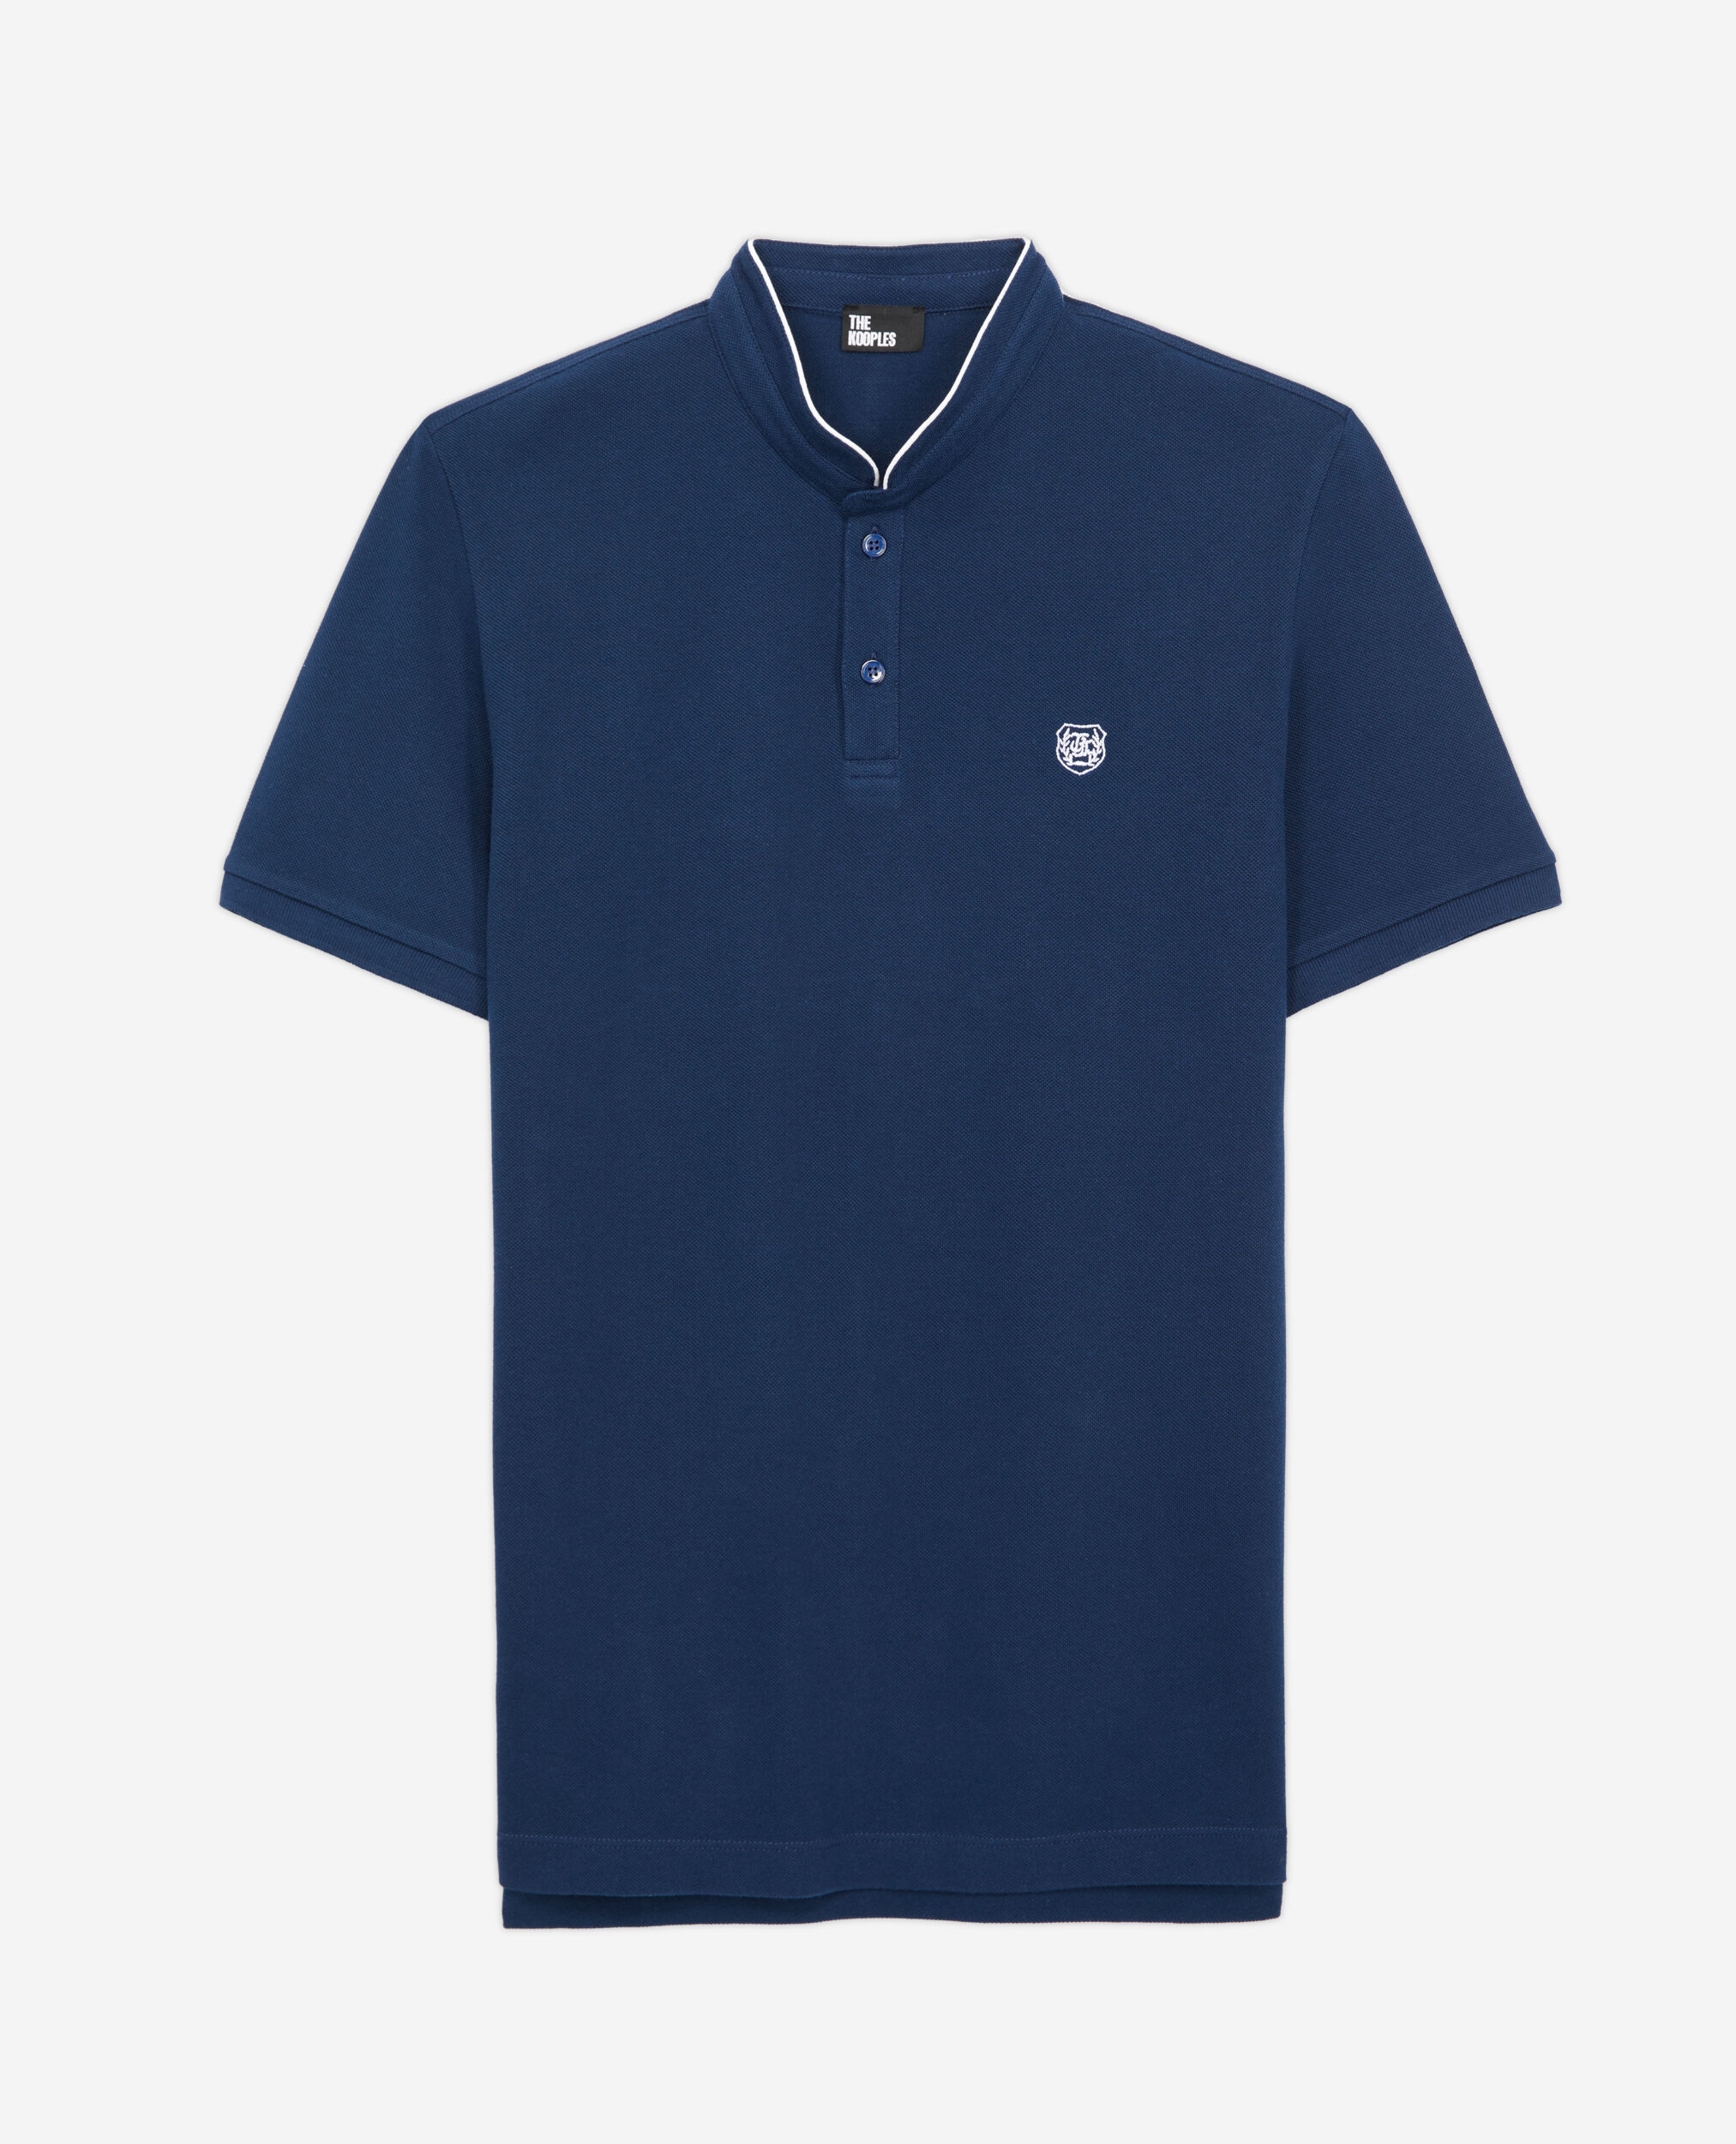 Navy blue officer collar polo shirt, NAVY, hi-res image number null